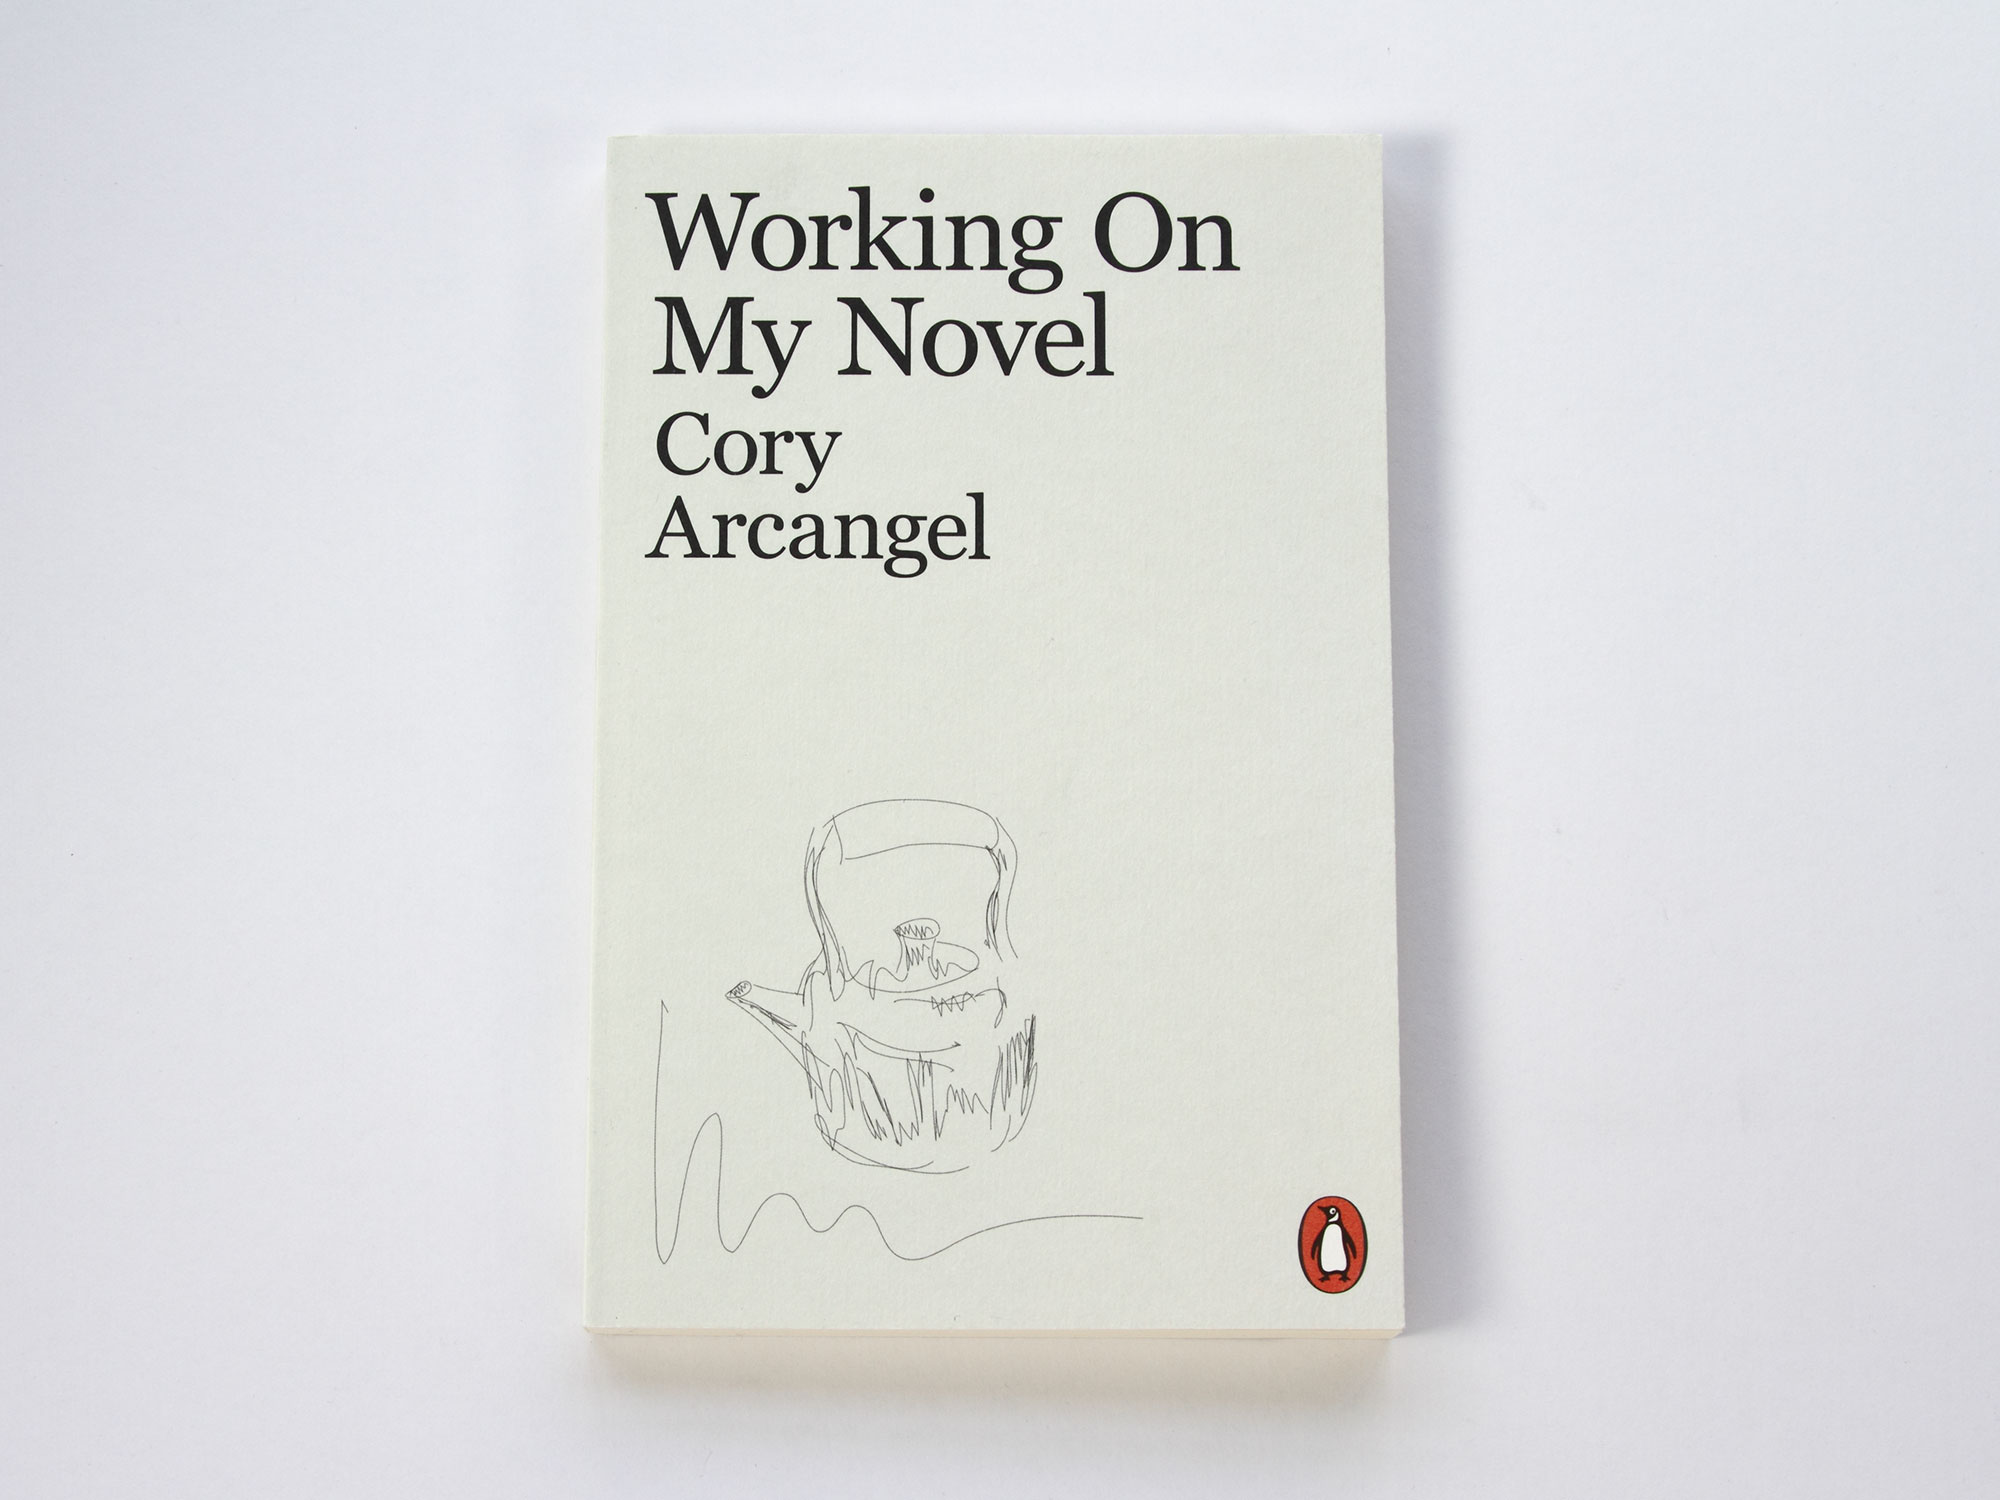 A Book Of Tweets By People Claiming They’re Working On Their Novels